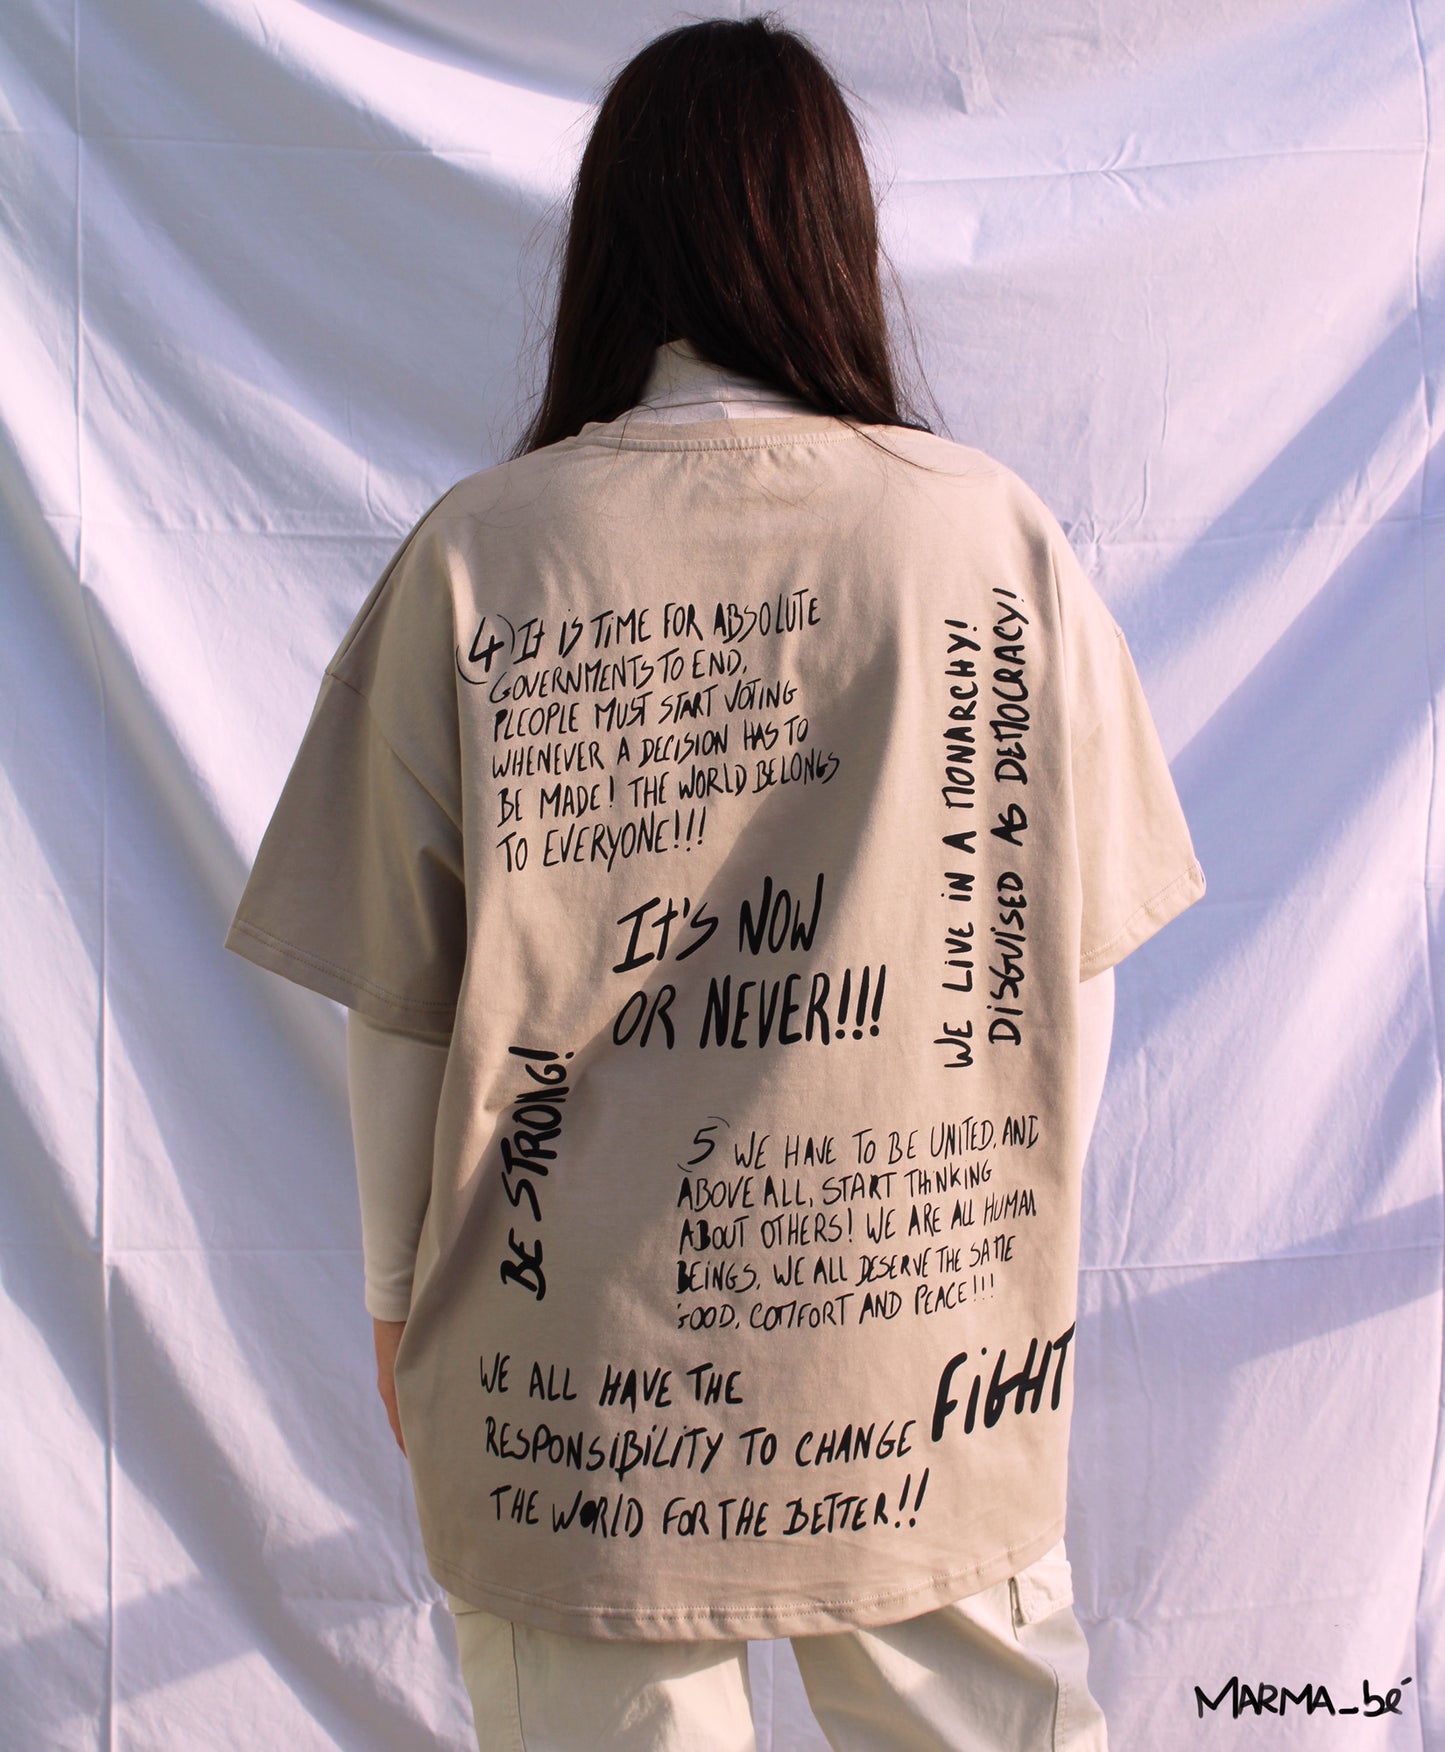 Oversize T-shirt "It's time to save the world"